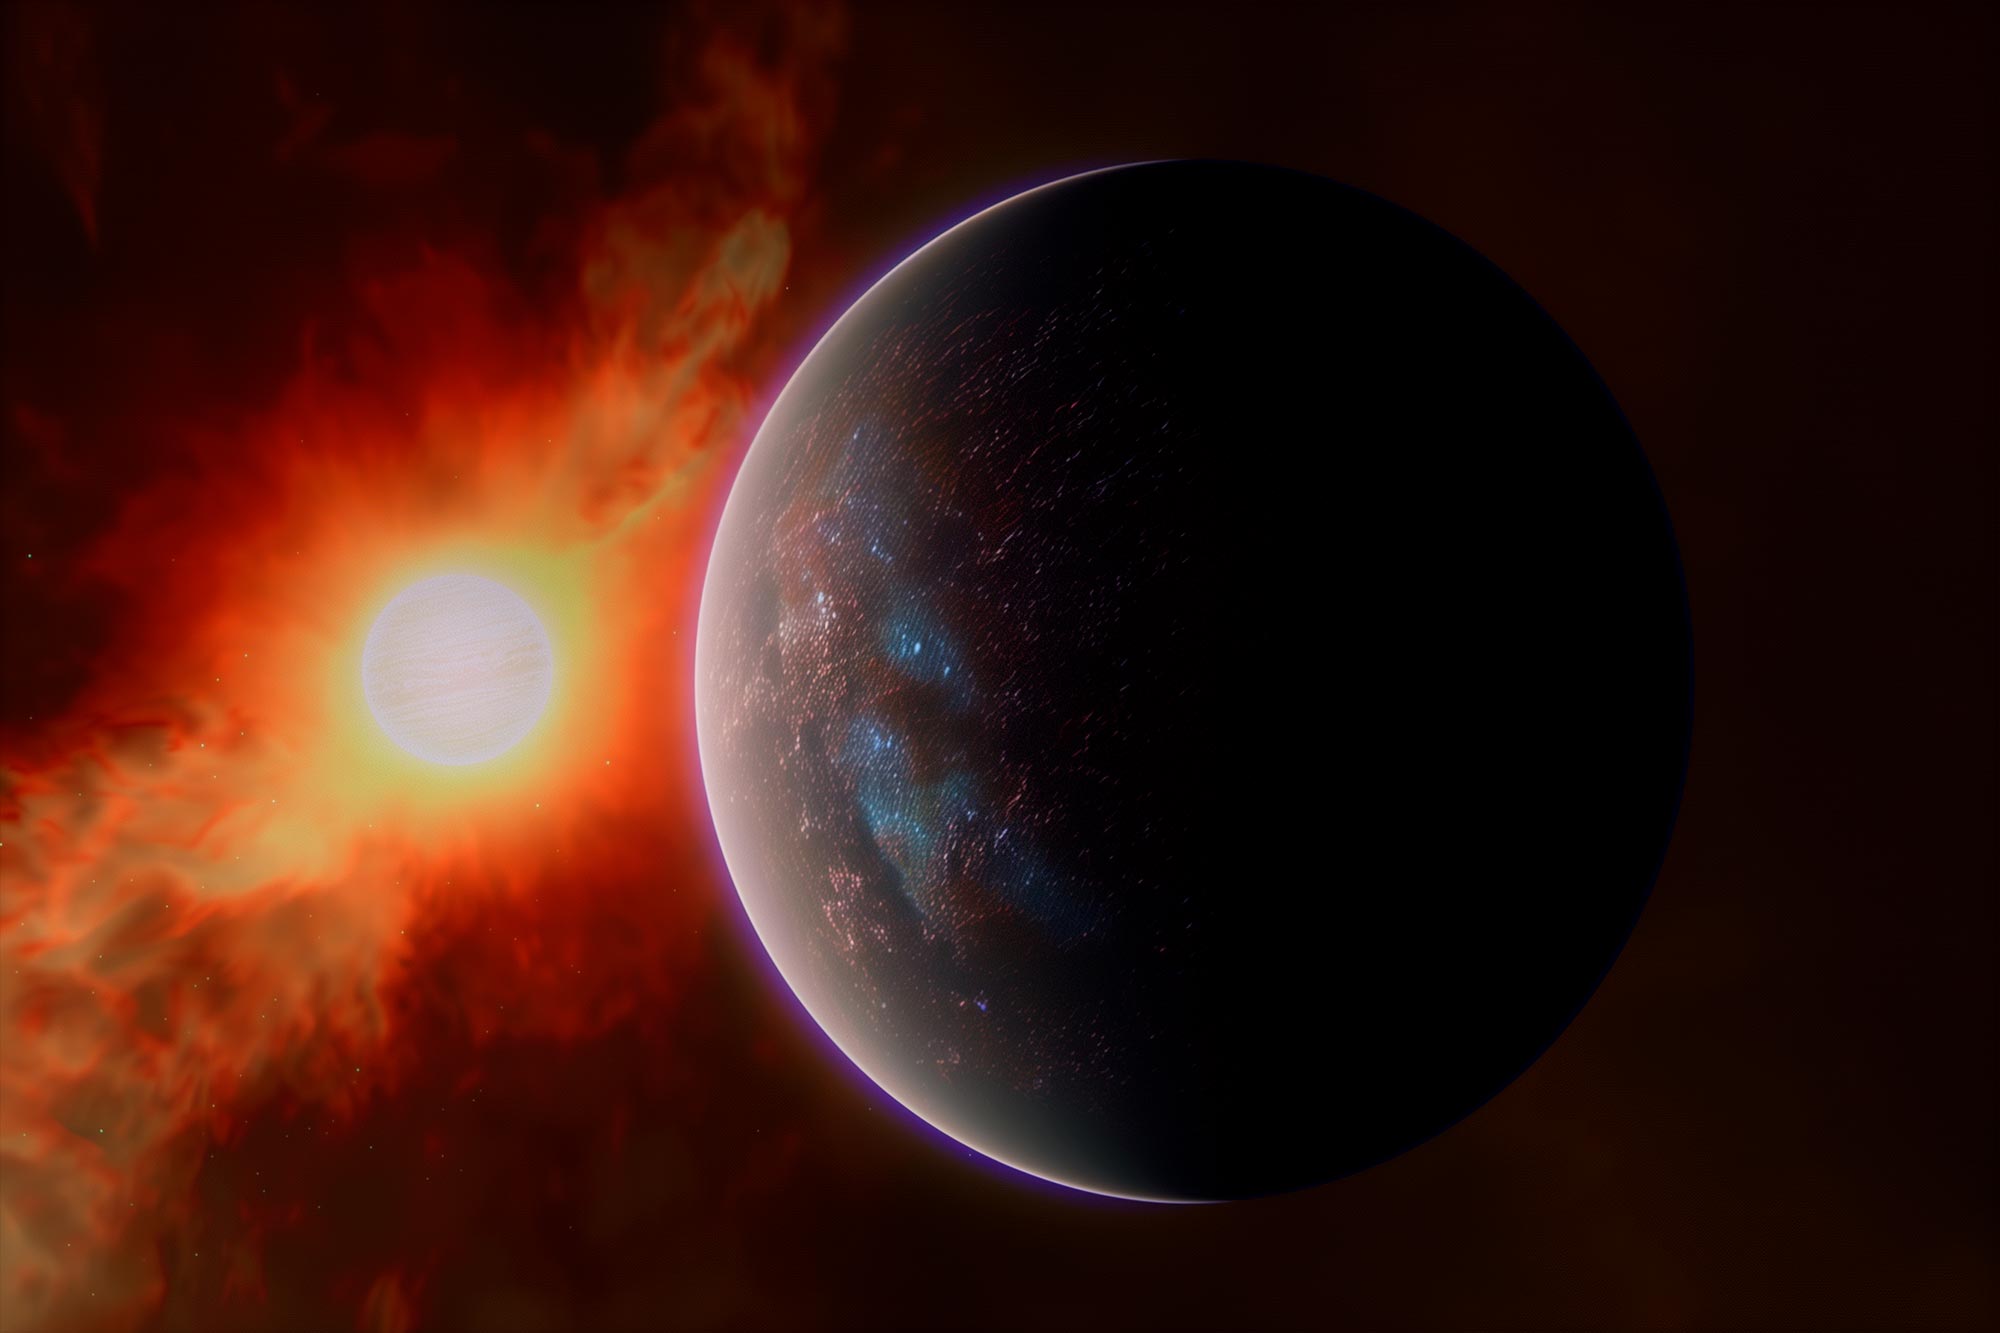 The Webb Telescope has discovered a lava planet with a carbon dioxide atmosphere.